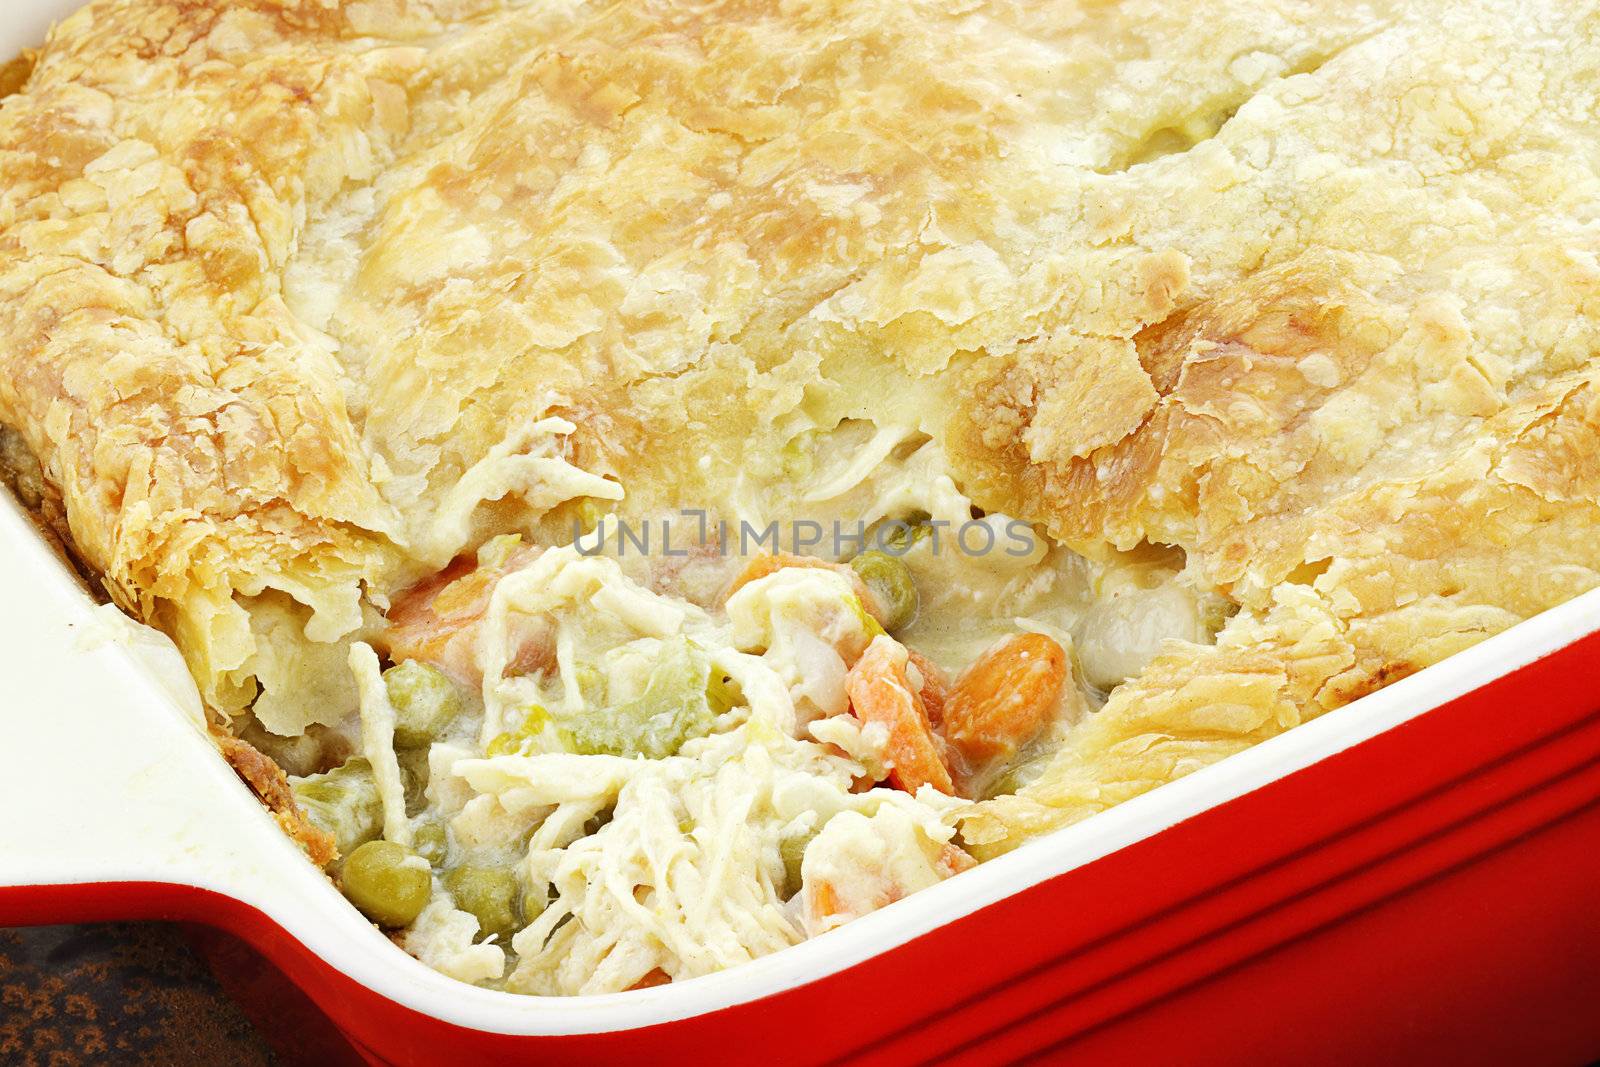 Above view of fresh Chicken Pot Pie with wooden spoon. Section of pot pie removed to reveal chicken, carrots and peas.                    

